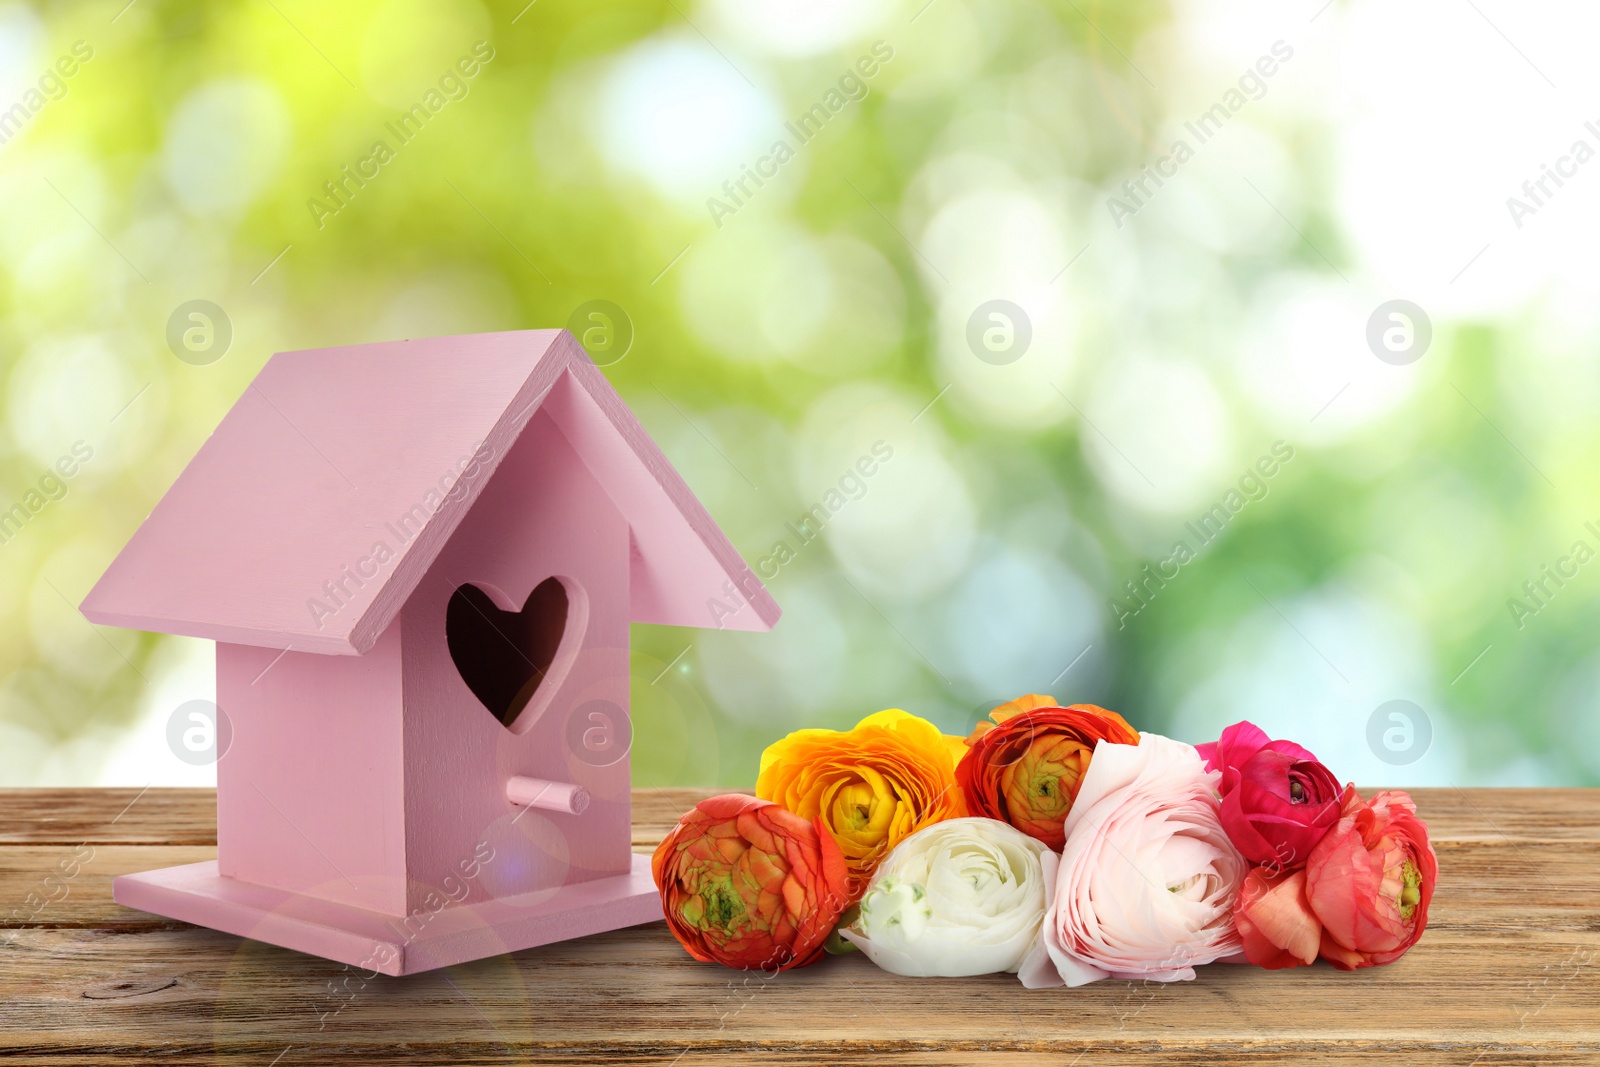 Image of Beautiful bird house and spring flowers on wooden table outdoors